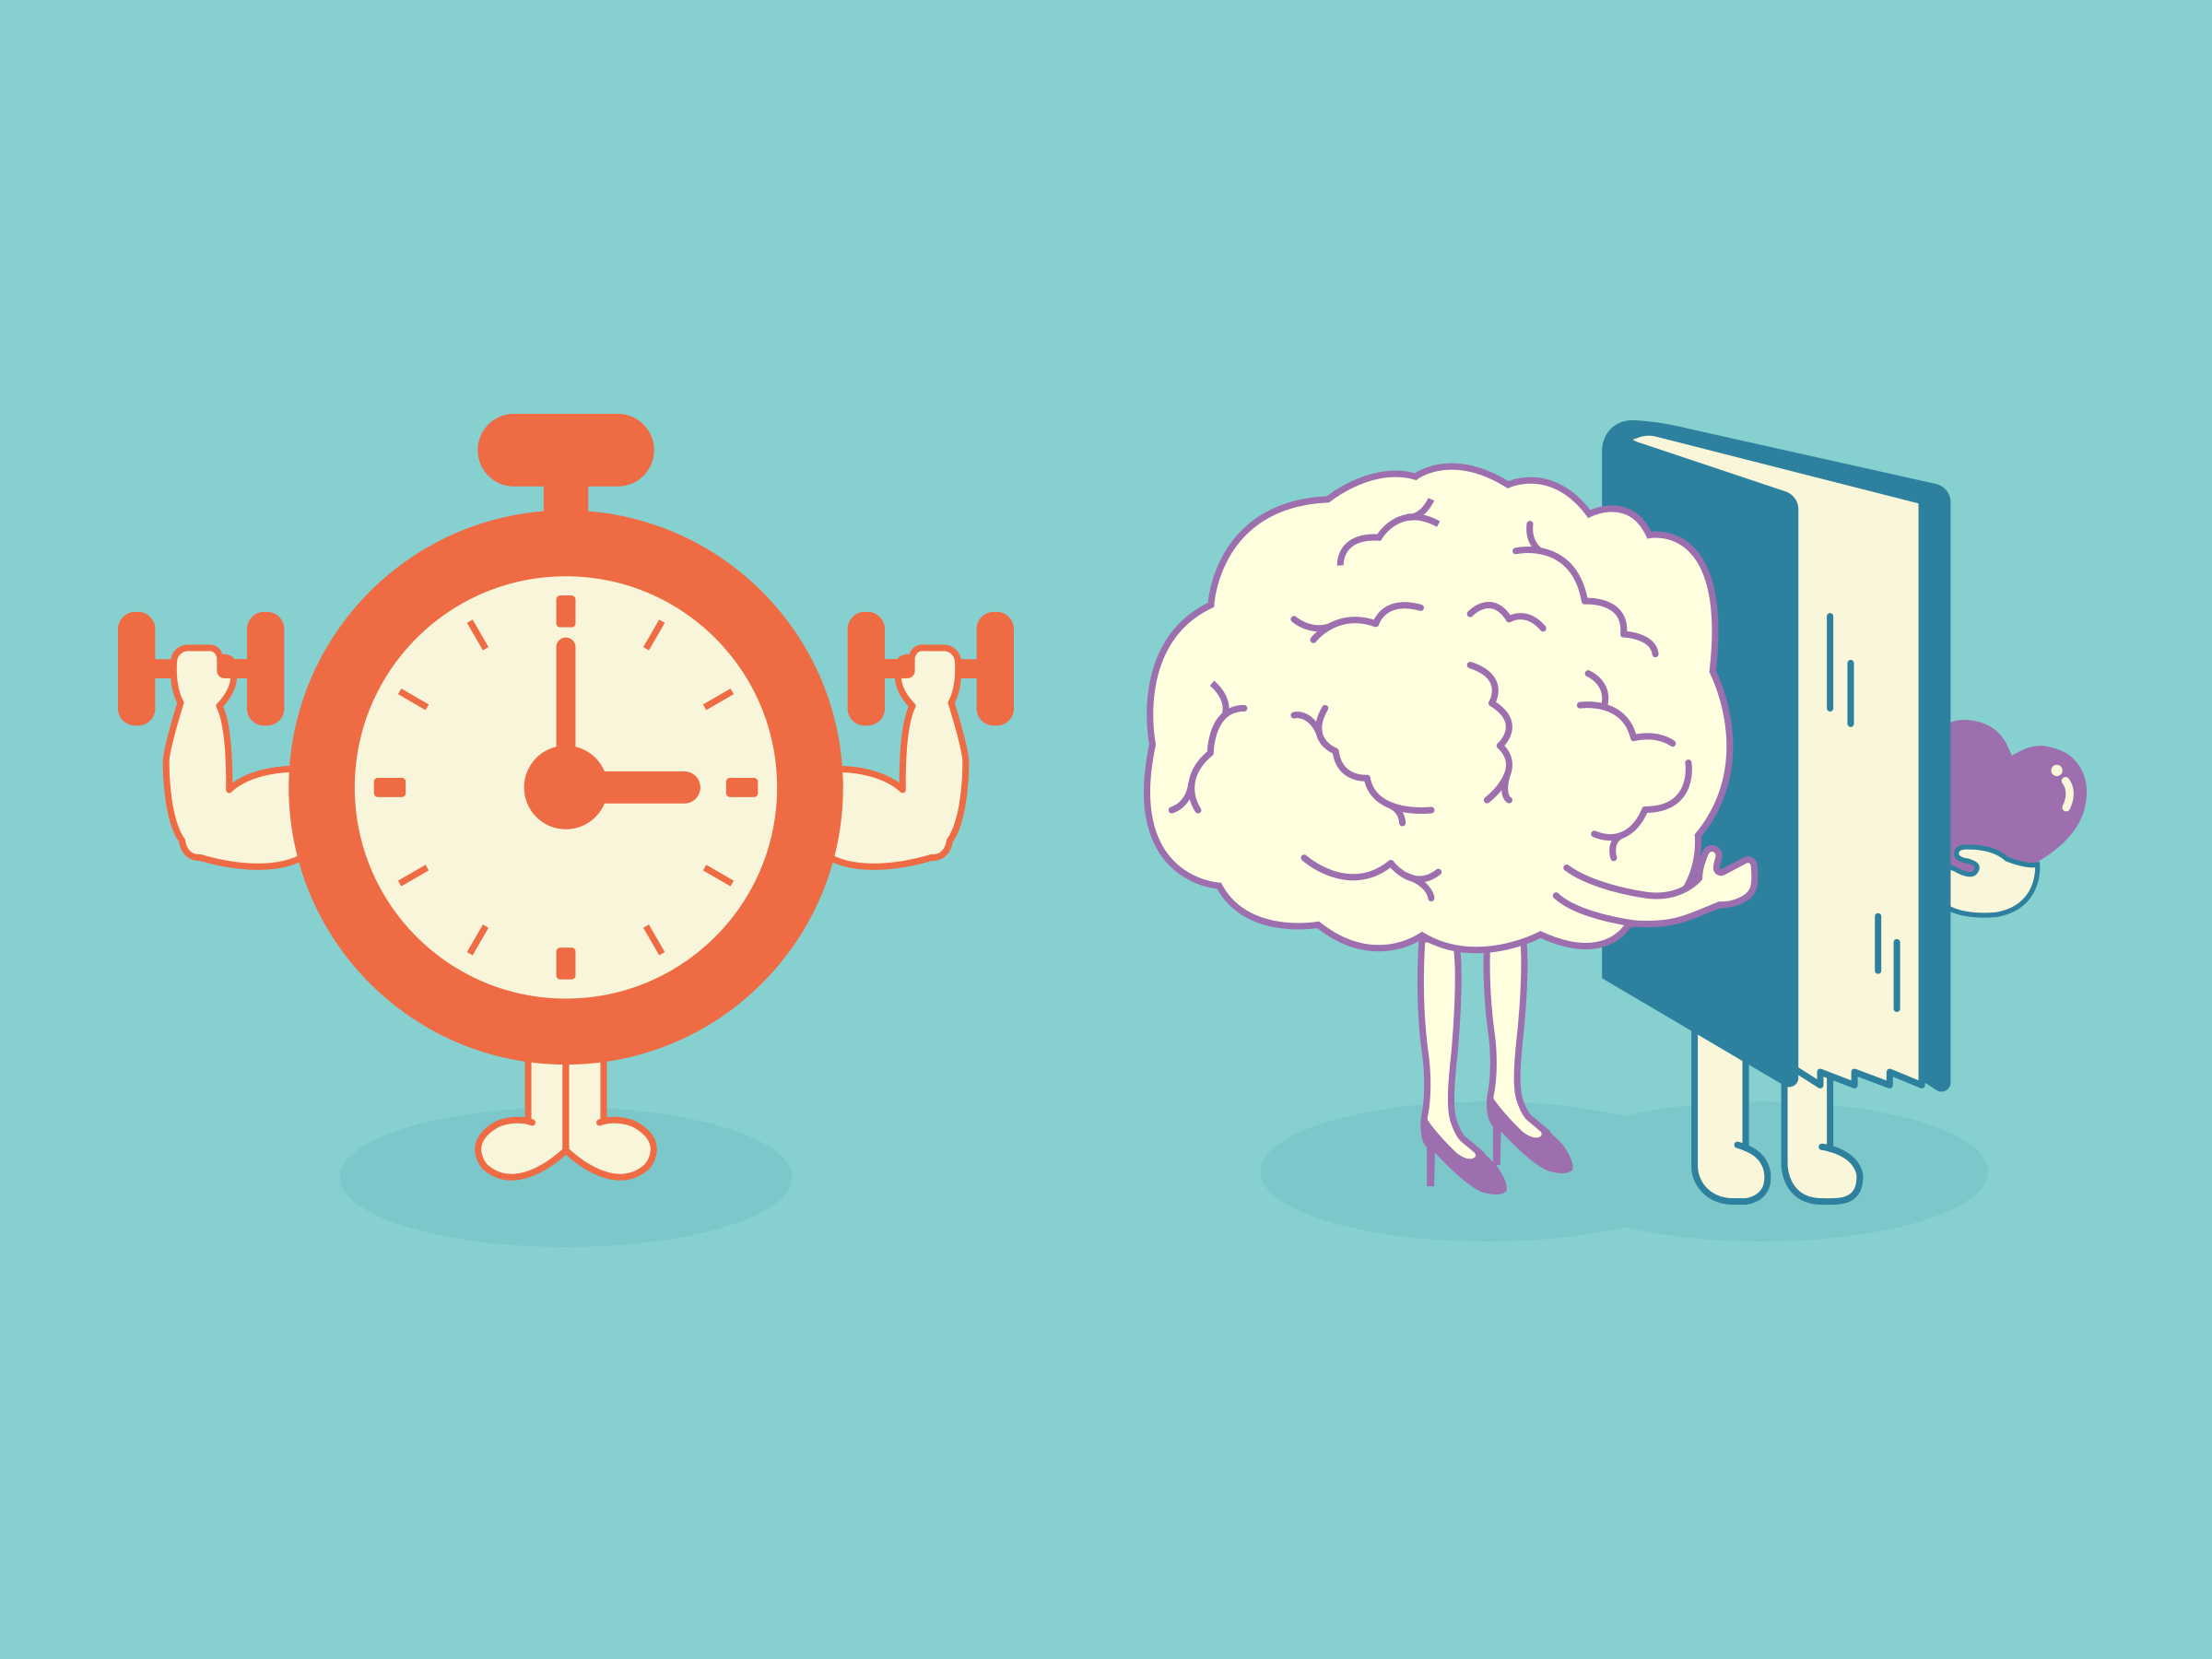 A vector illustration of a brain with high heels kissing a book holding a love heart while a buff alarm clock looks on